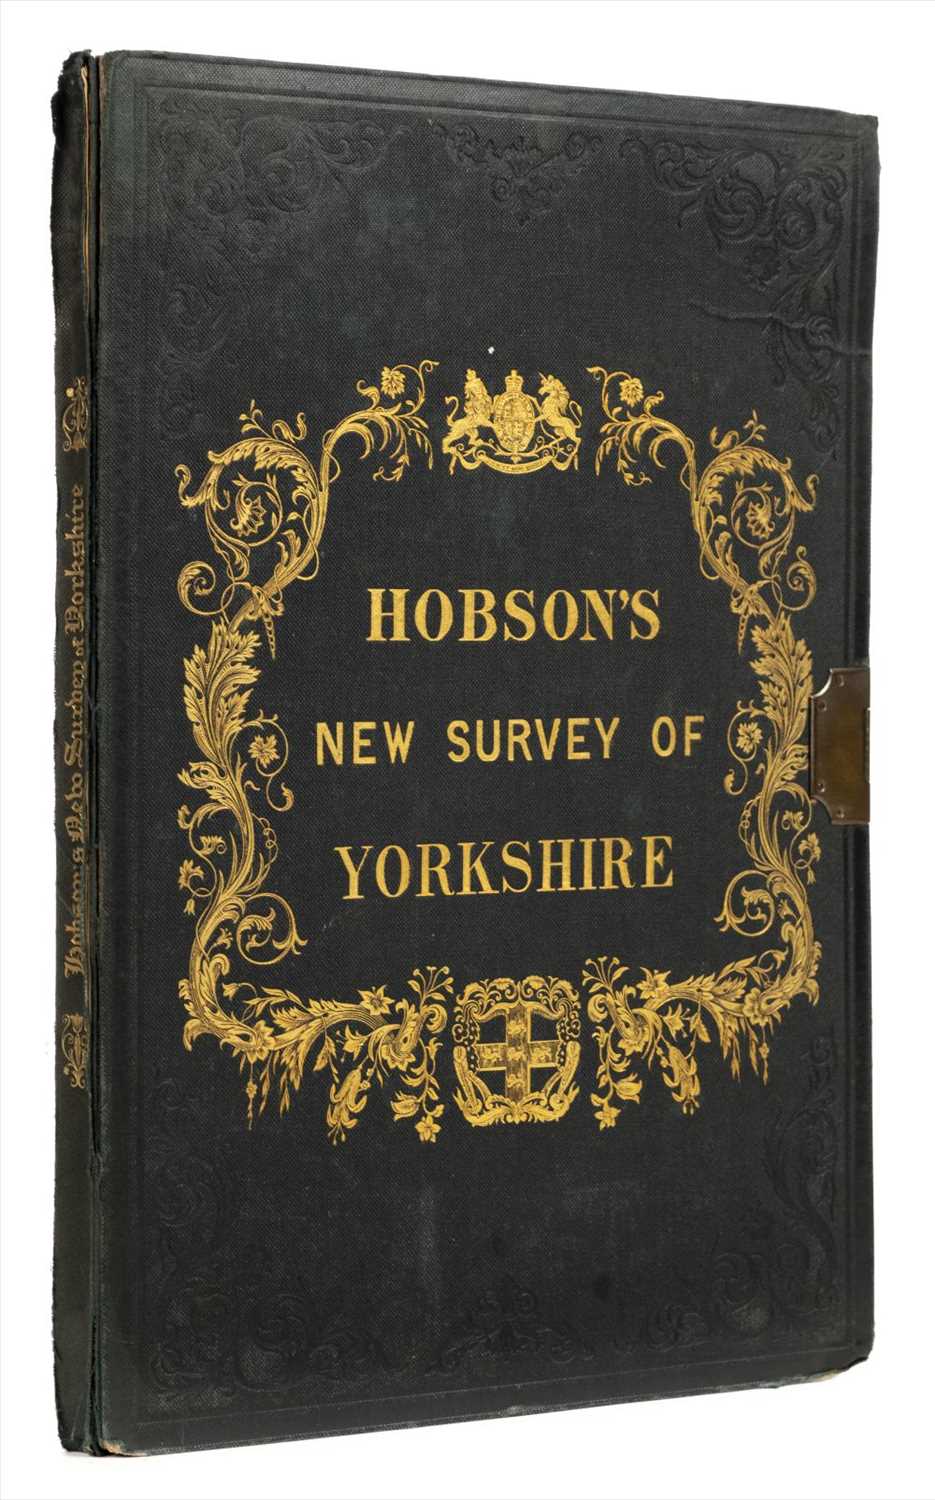 Lot 89 - Yorkshire. Hobson (William Colling), Yorkshire, 1844